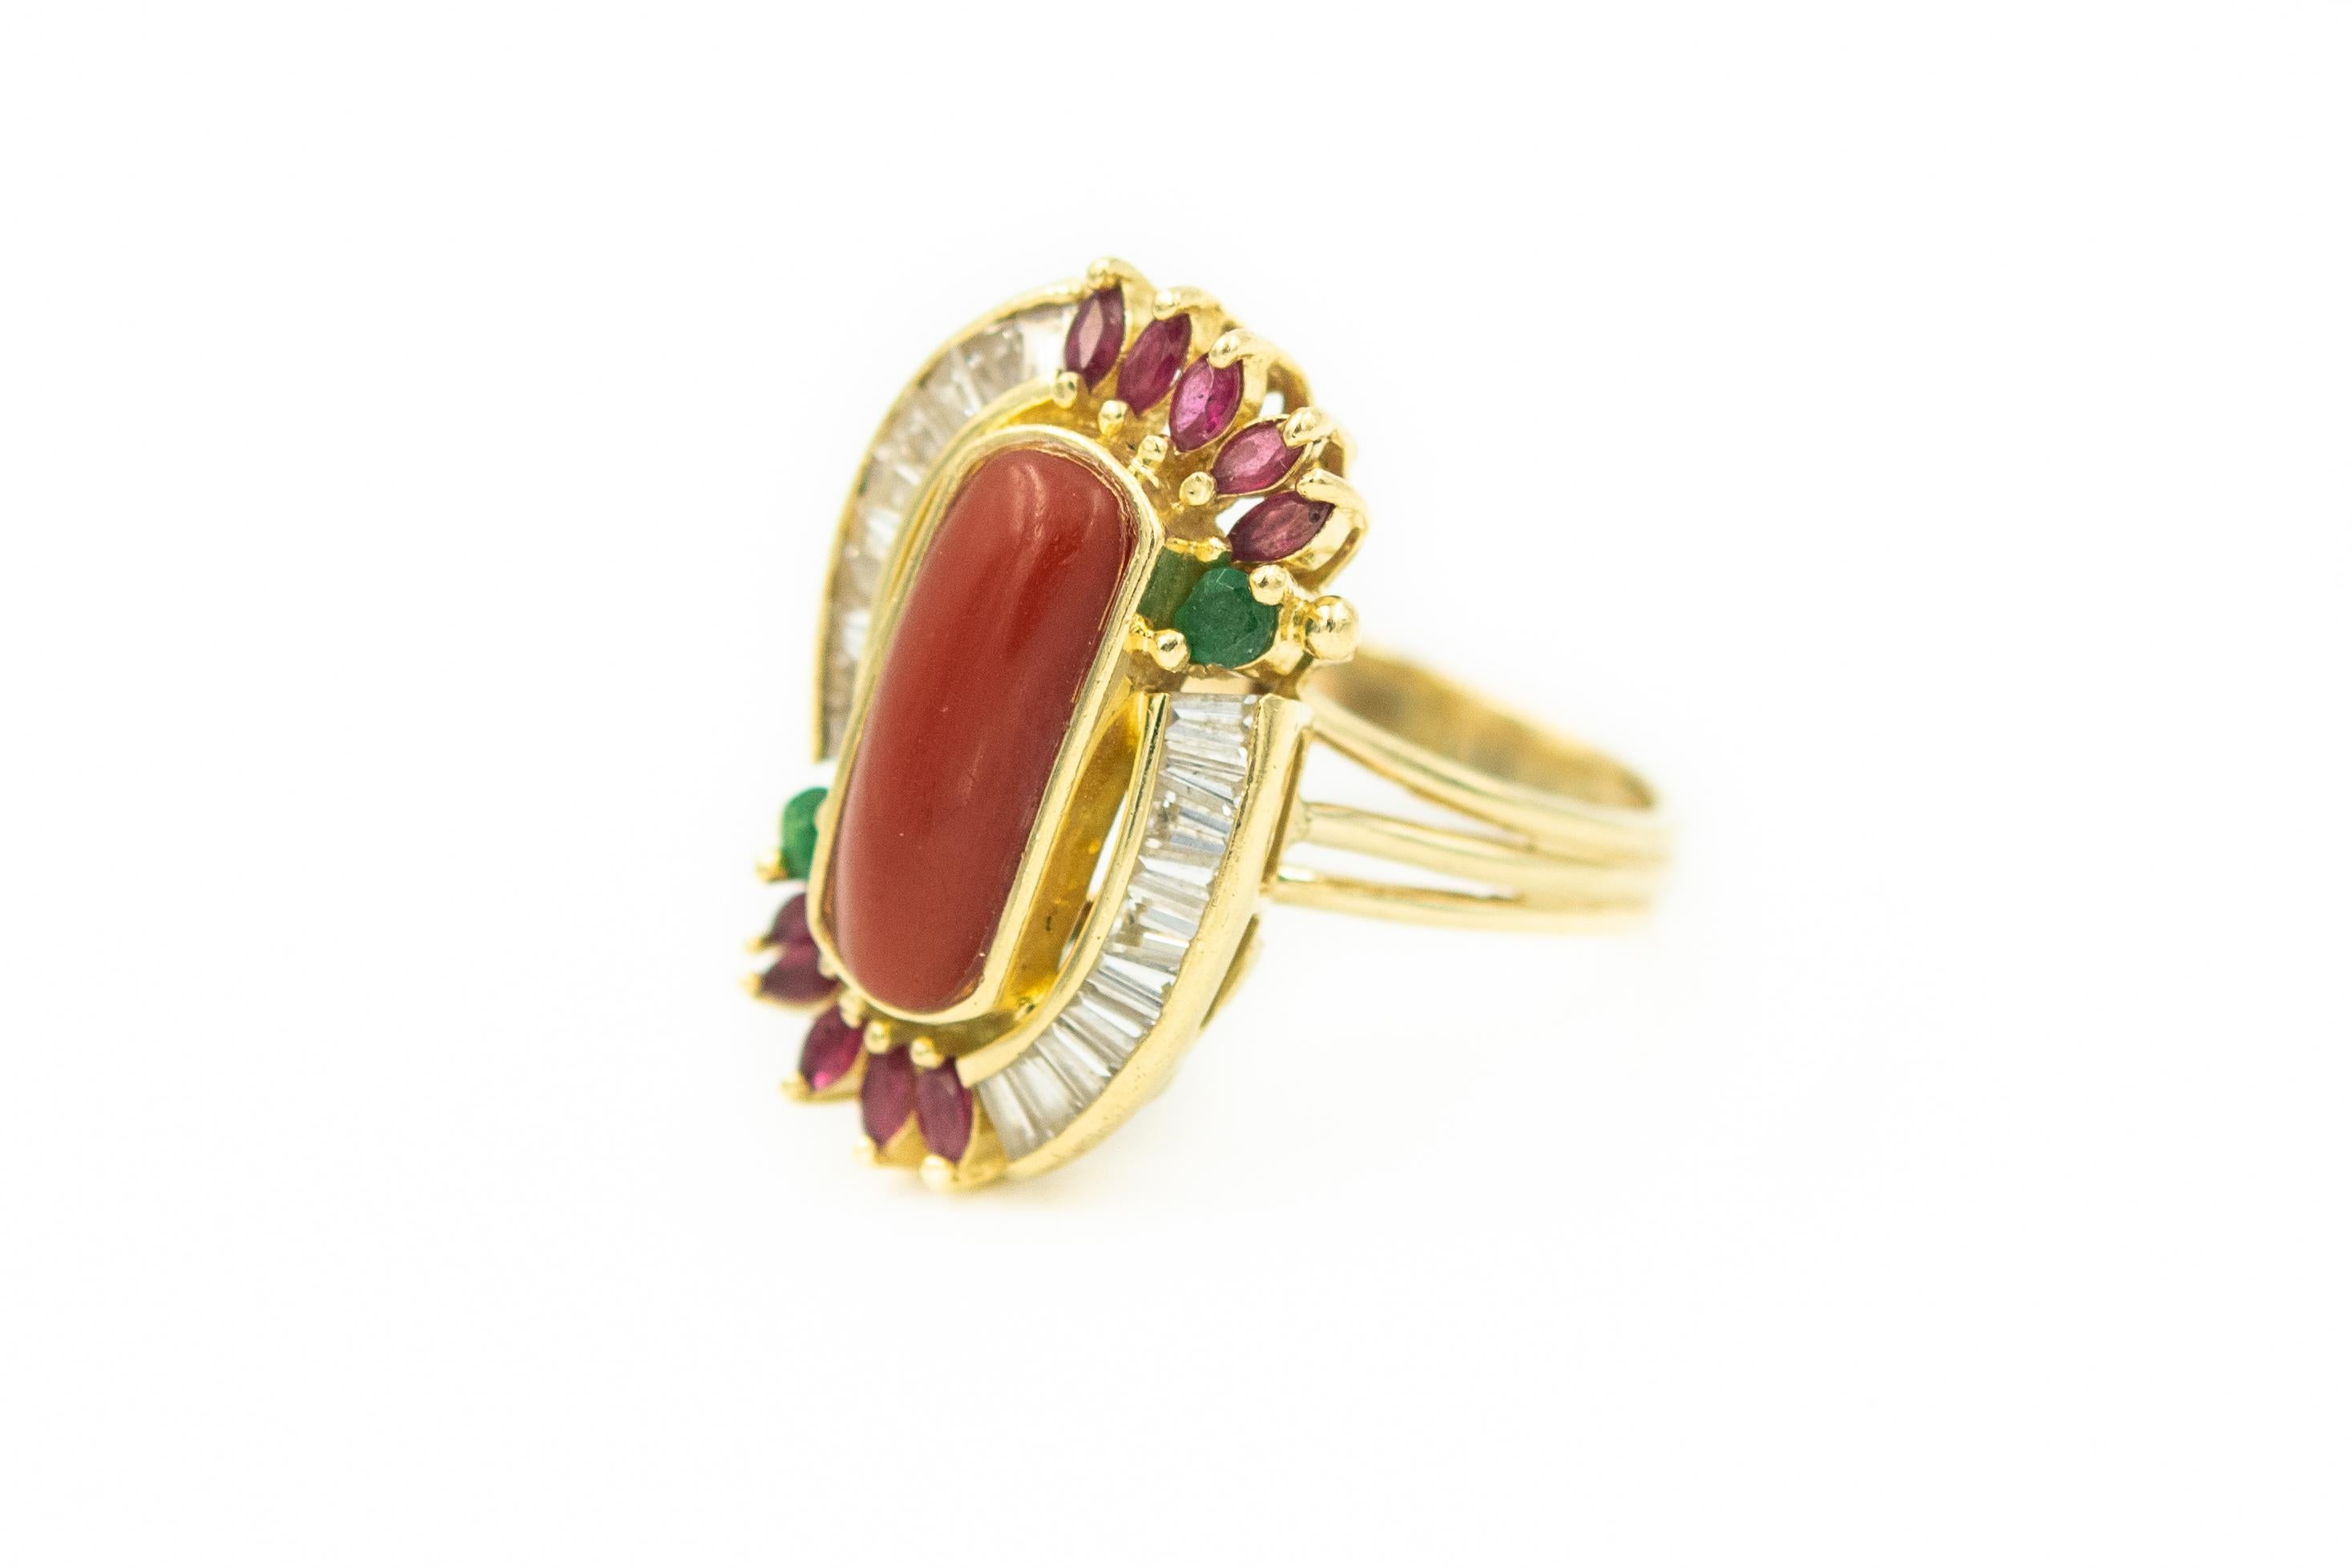 Late 20th Century cocktail ring featuring a lozenge shaped bezel set coral slab accented by 10 prong set marquise shaped rubies, 2 round emerald and 20 white sapphire baguette shaped stones.  The stones are mounted in a 14k yellow gold ring.  The